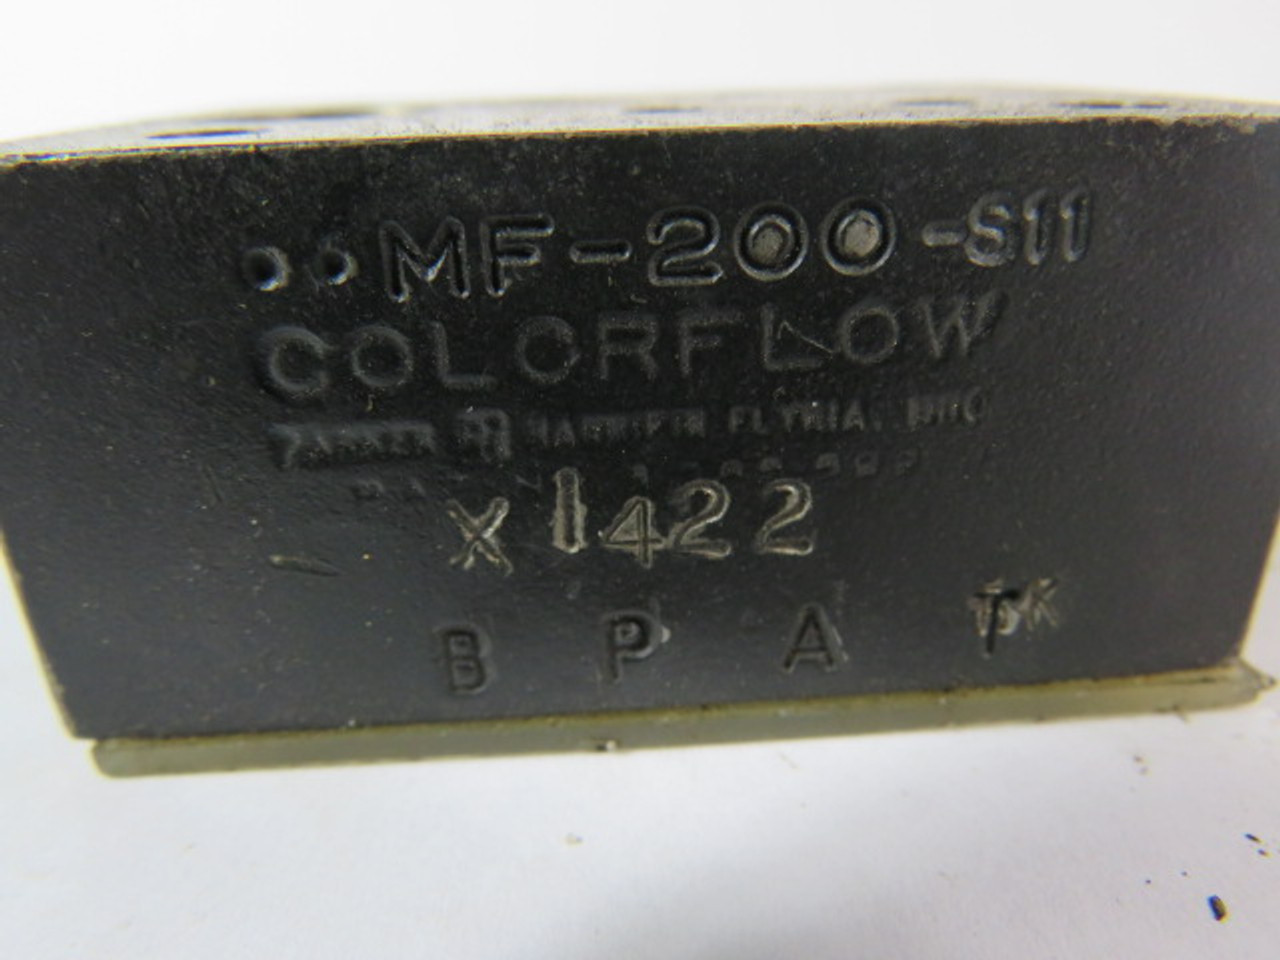 Parker MF-200-S11 ColorFlow Calibrated Flow Control Valve USED